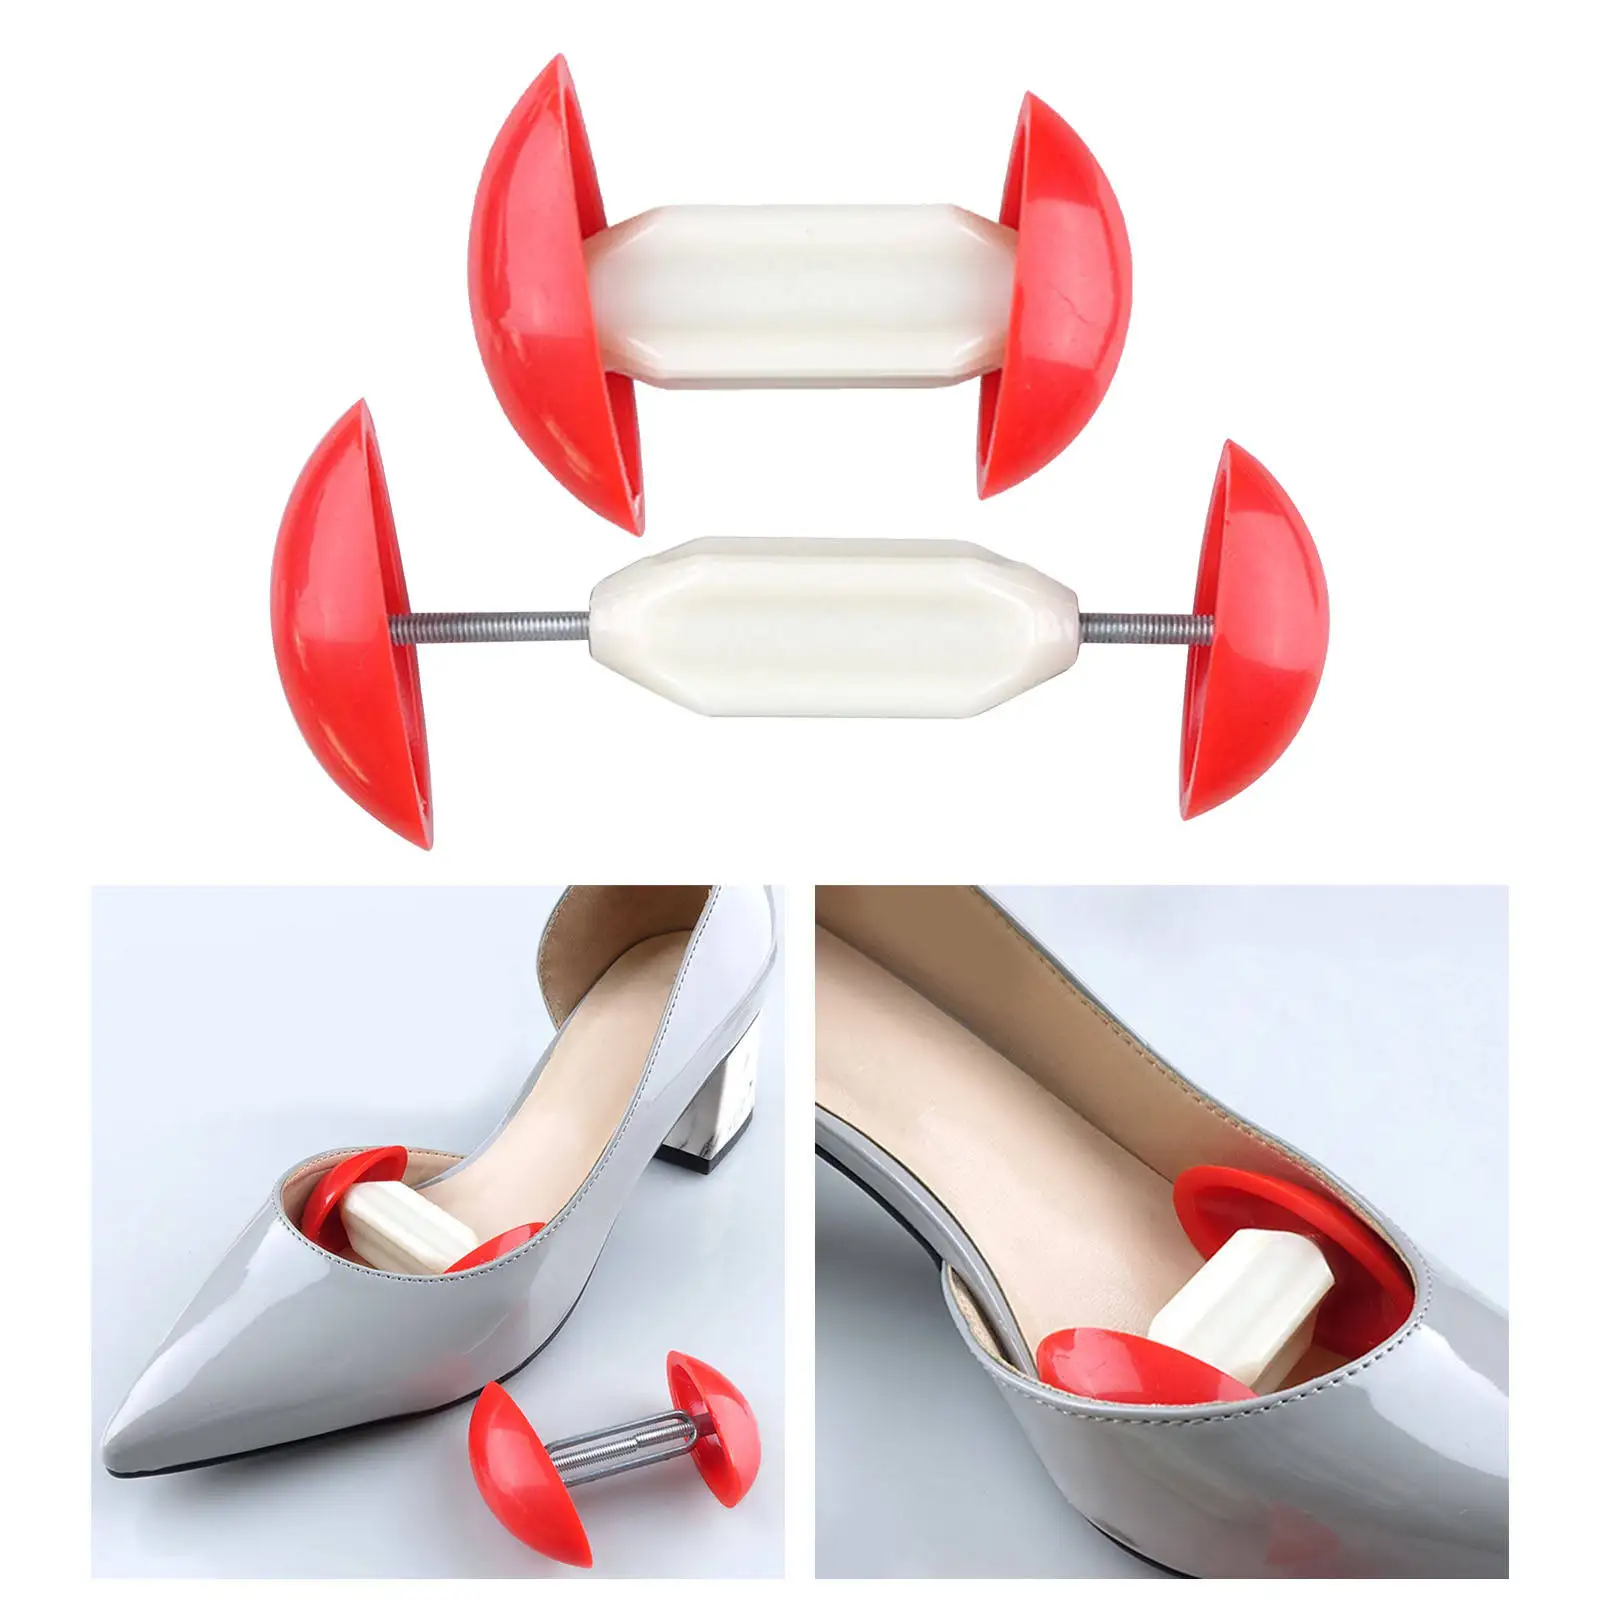 2 Pieces Shoe Stretcher Plastic Simple Adjustable Mini Shoes Trees for High Heels Boots